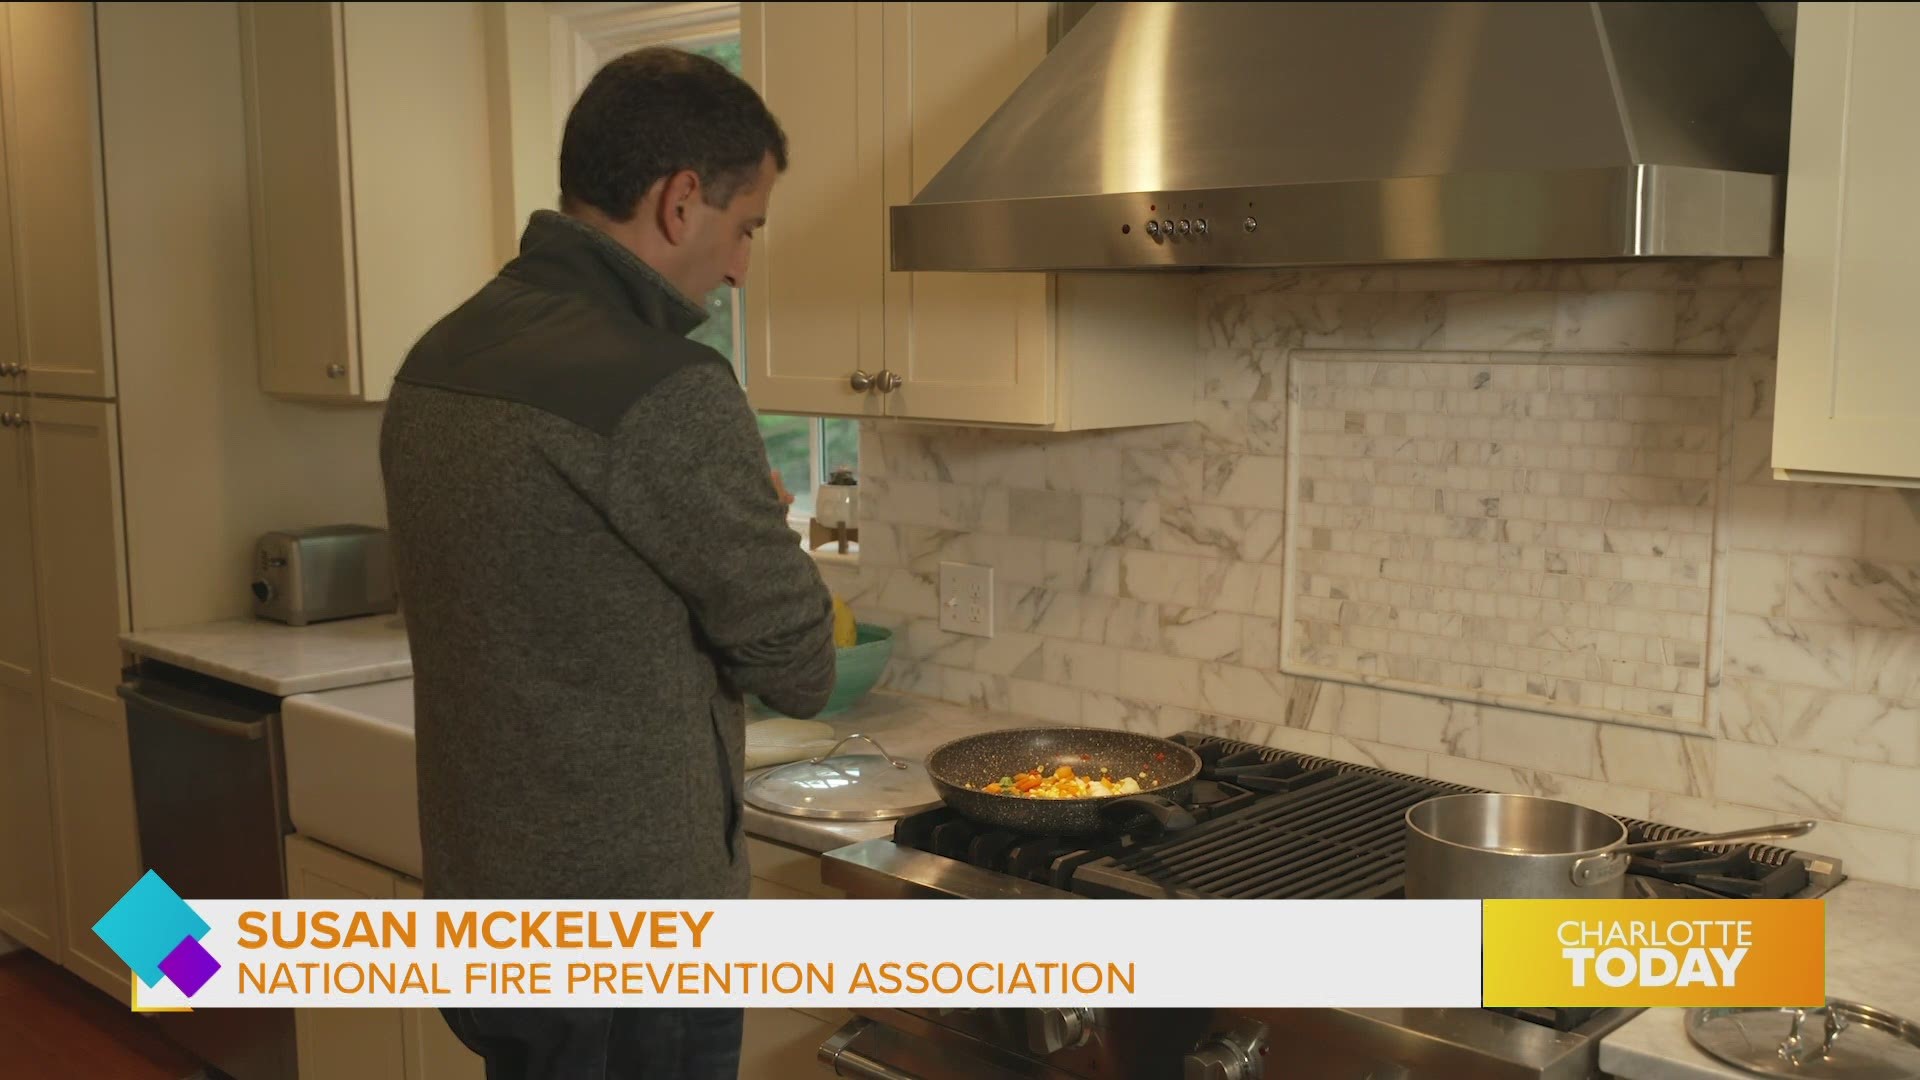 Fire safety tips from the National Fire Protection Association